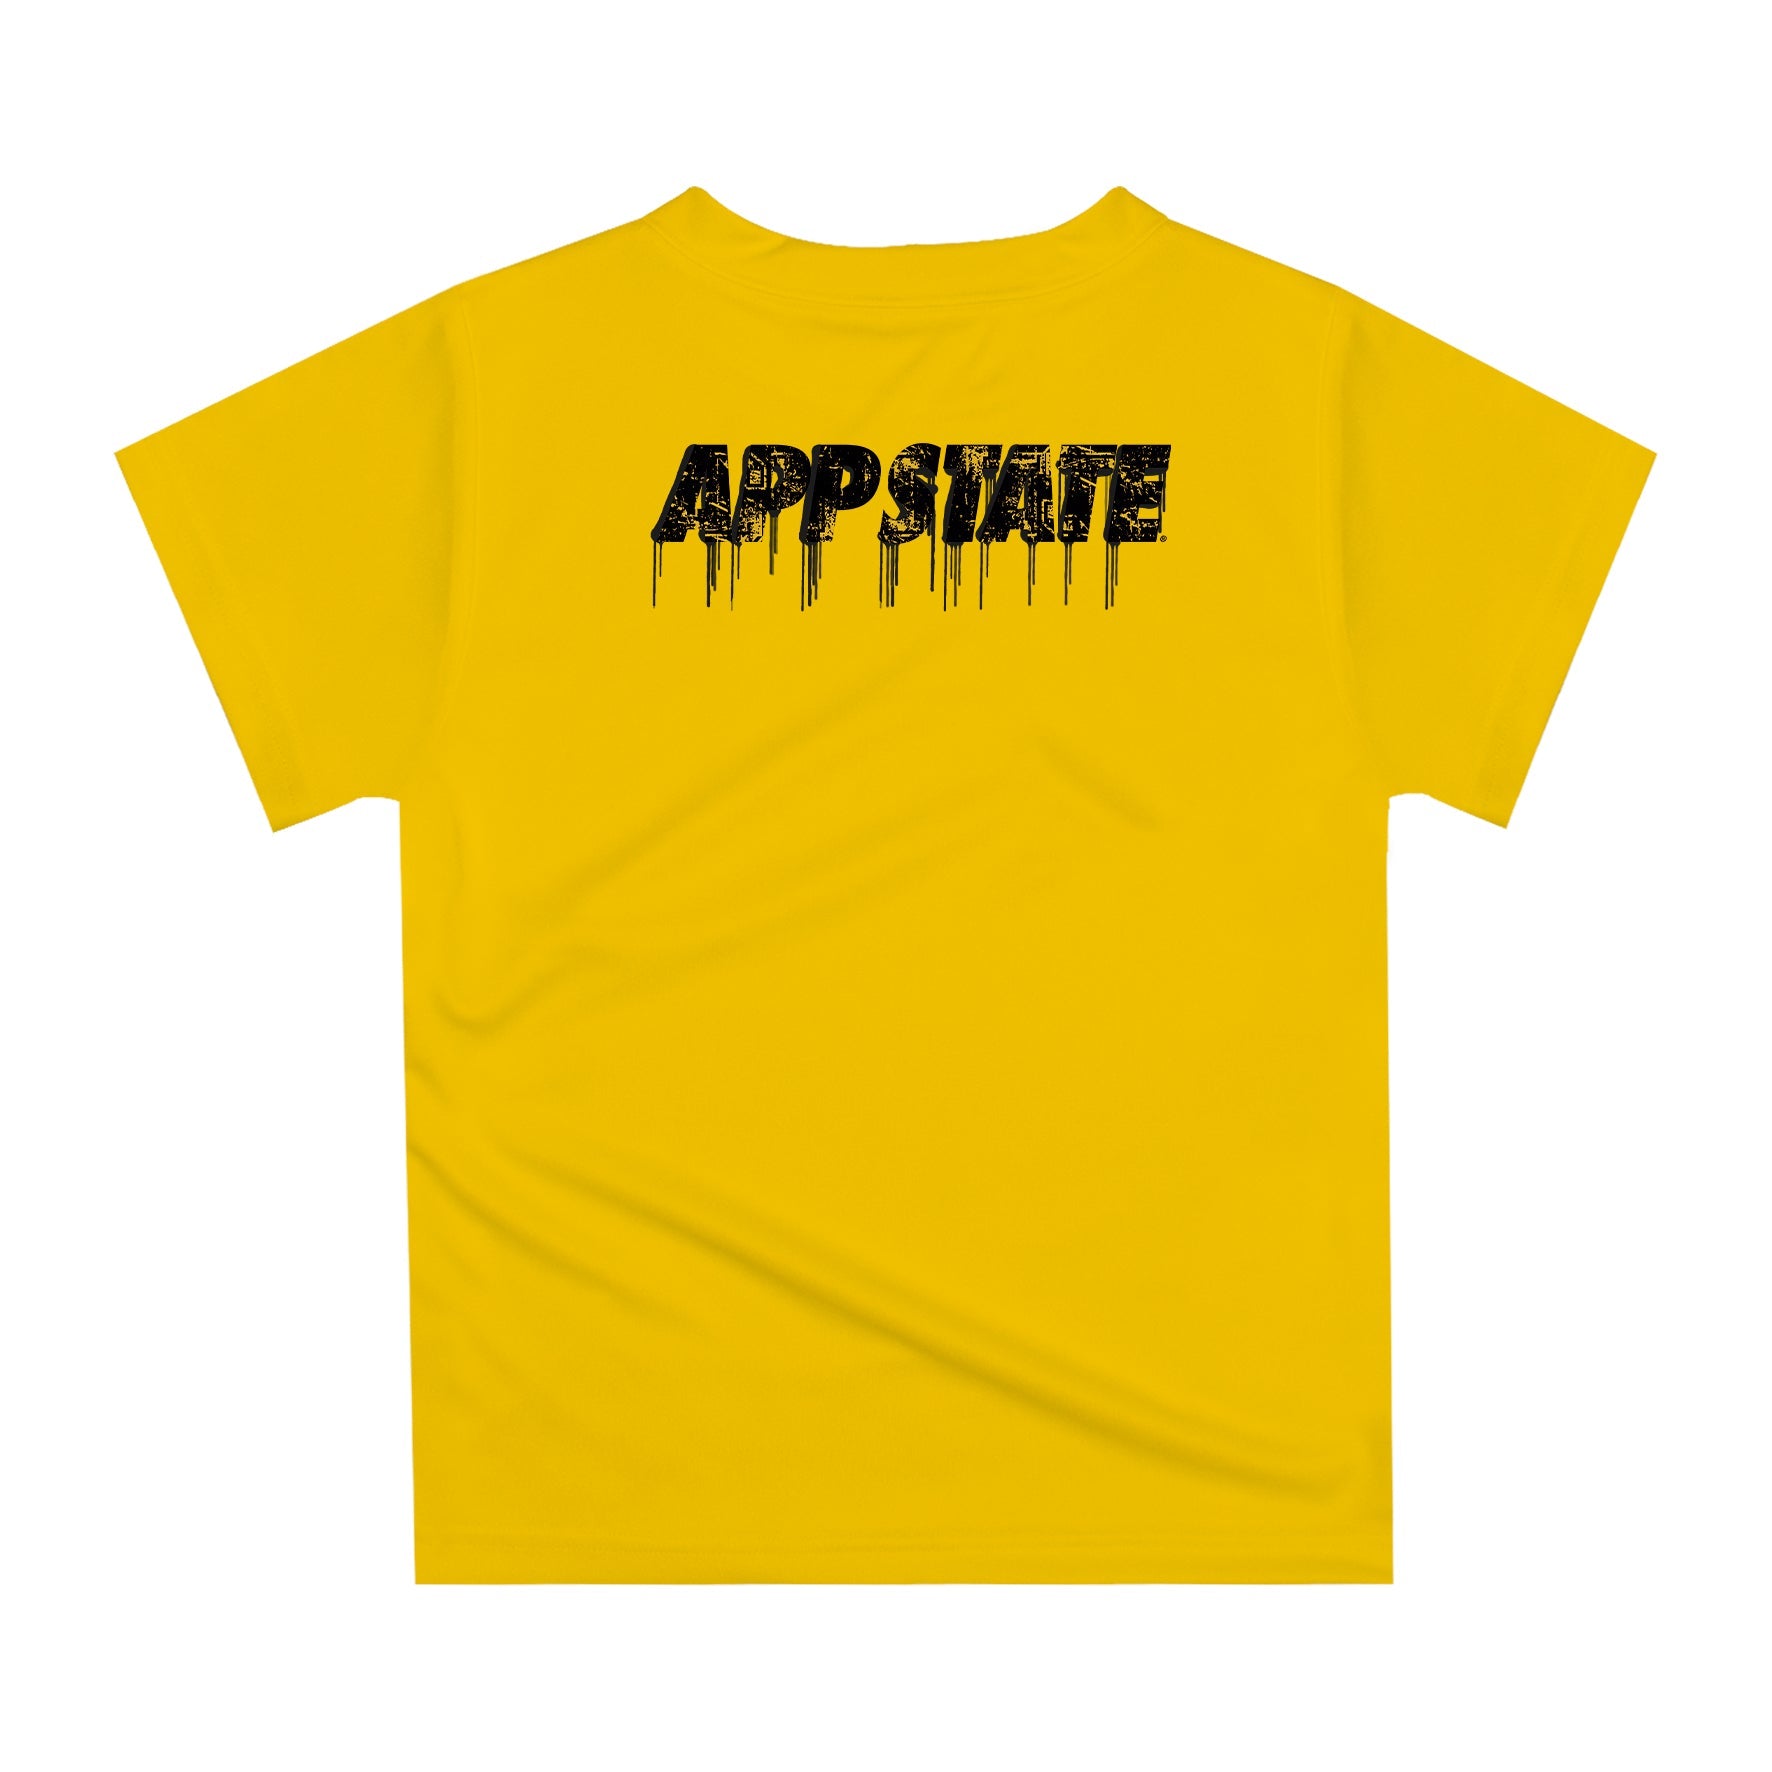 App State Mountaineers Original Dripping Football Helmet Gold T-Shirt by Vive La Fete